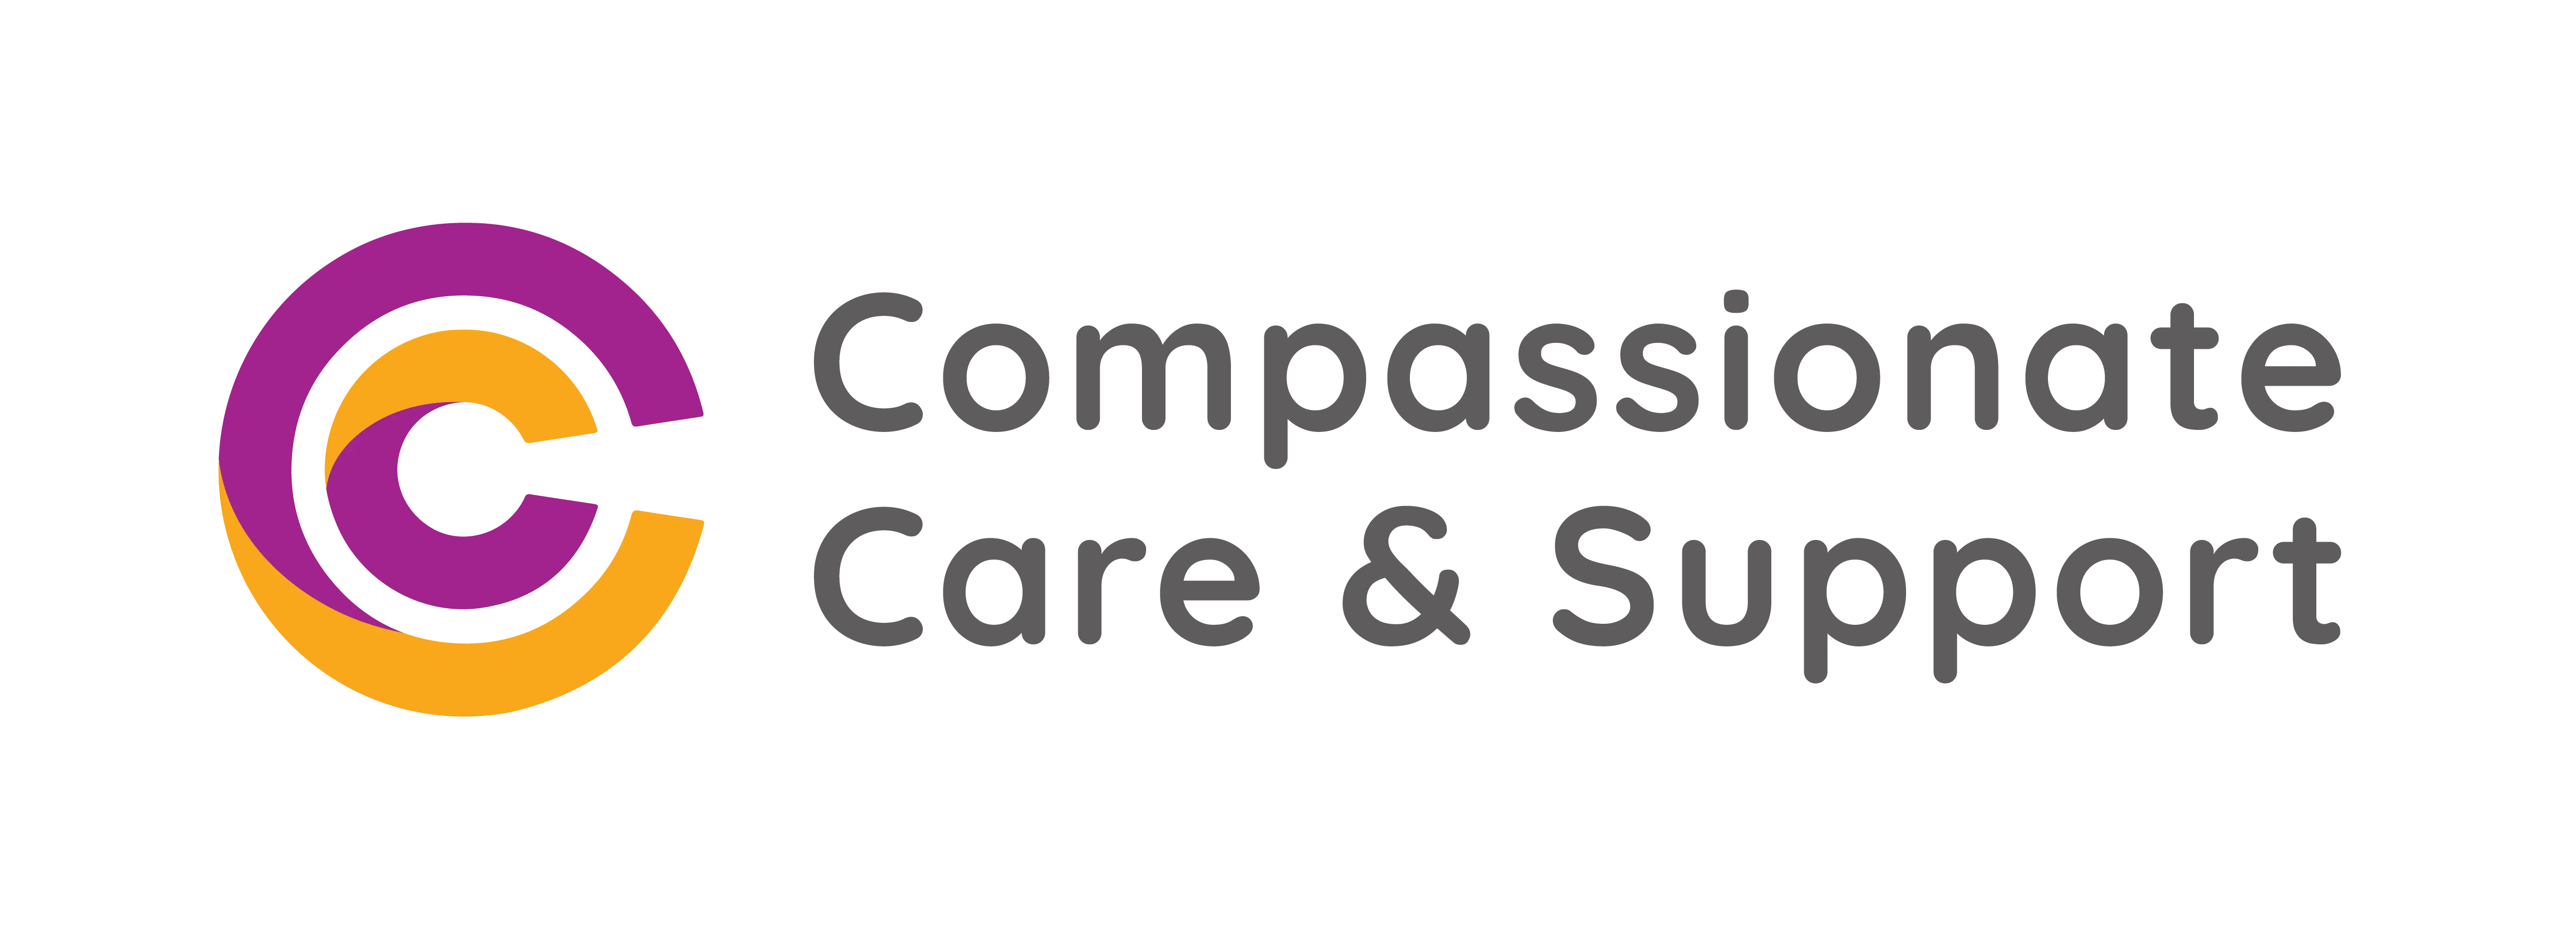 compassionate care and support logo